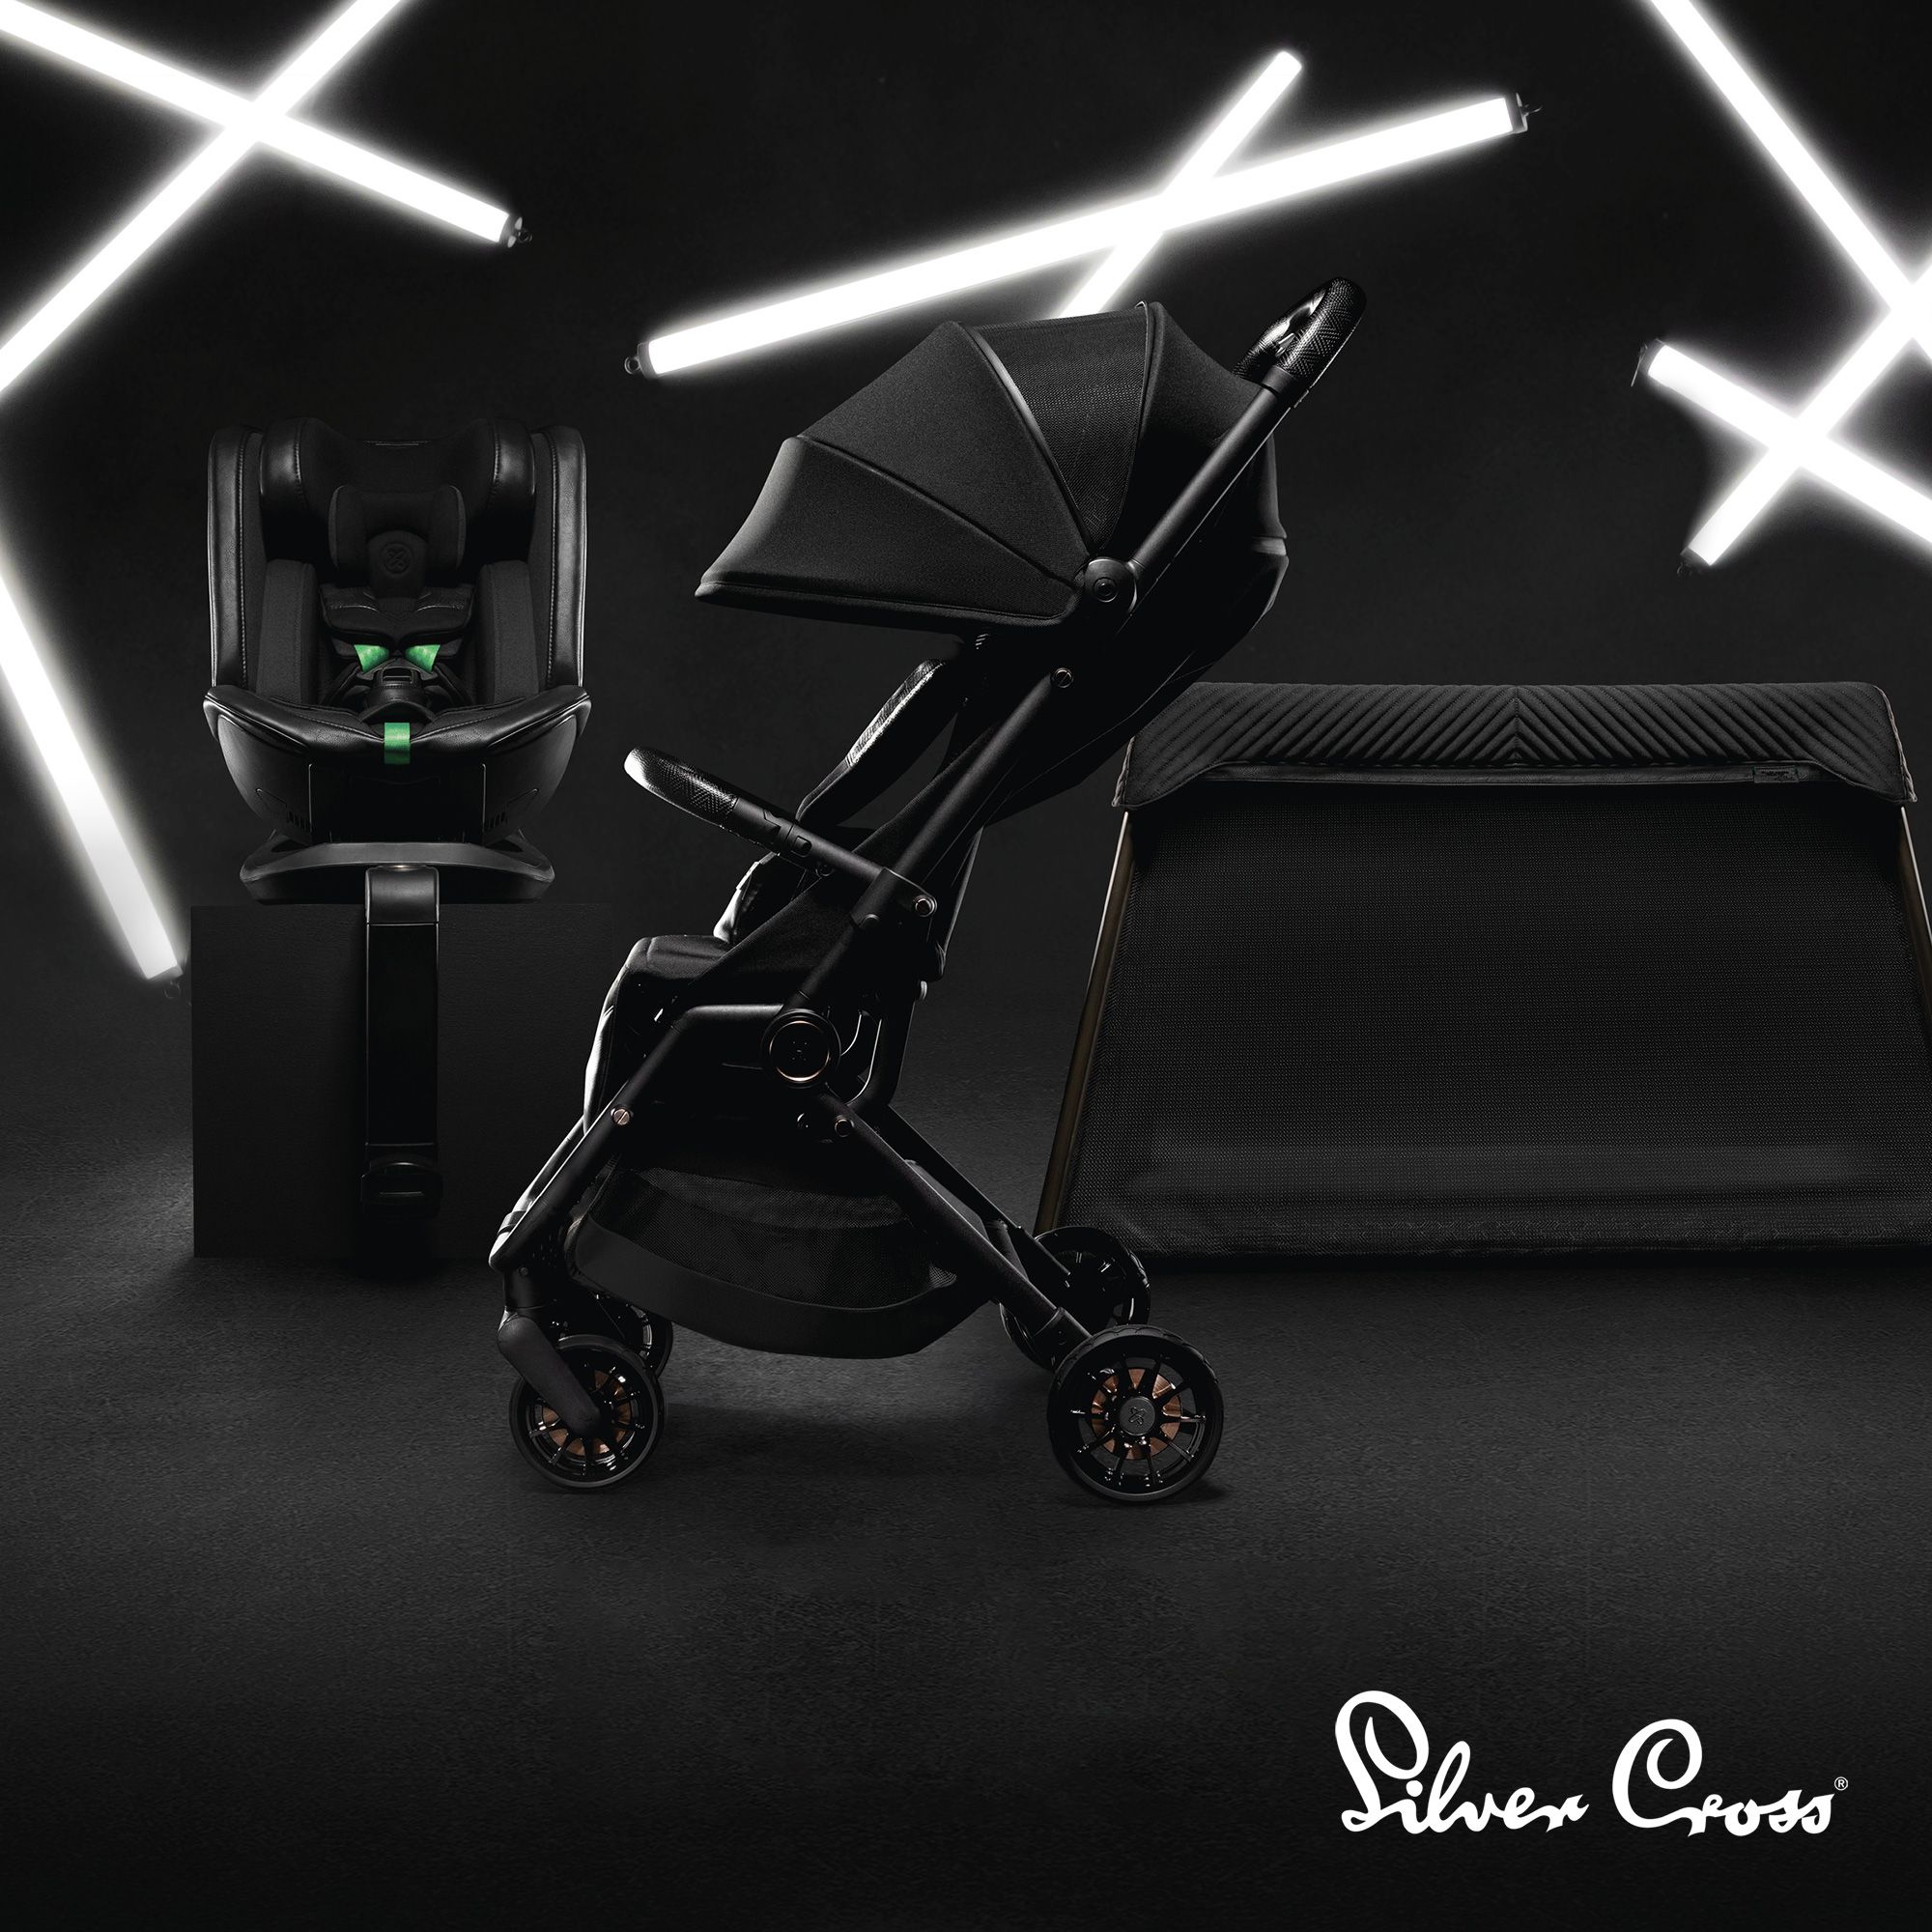 Image of a Silver Cross Pram, with a black background and white neon LED lights behind it